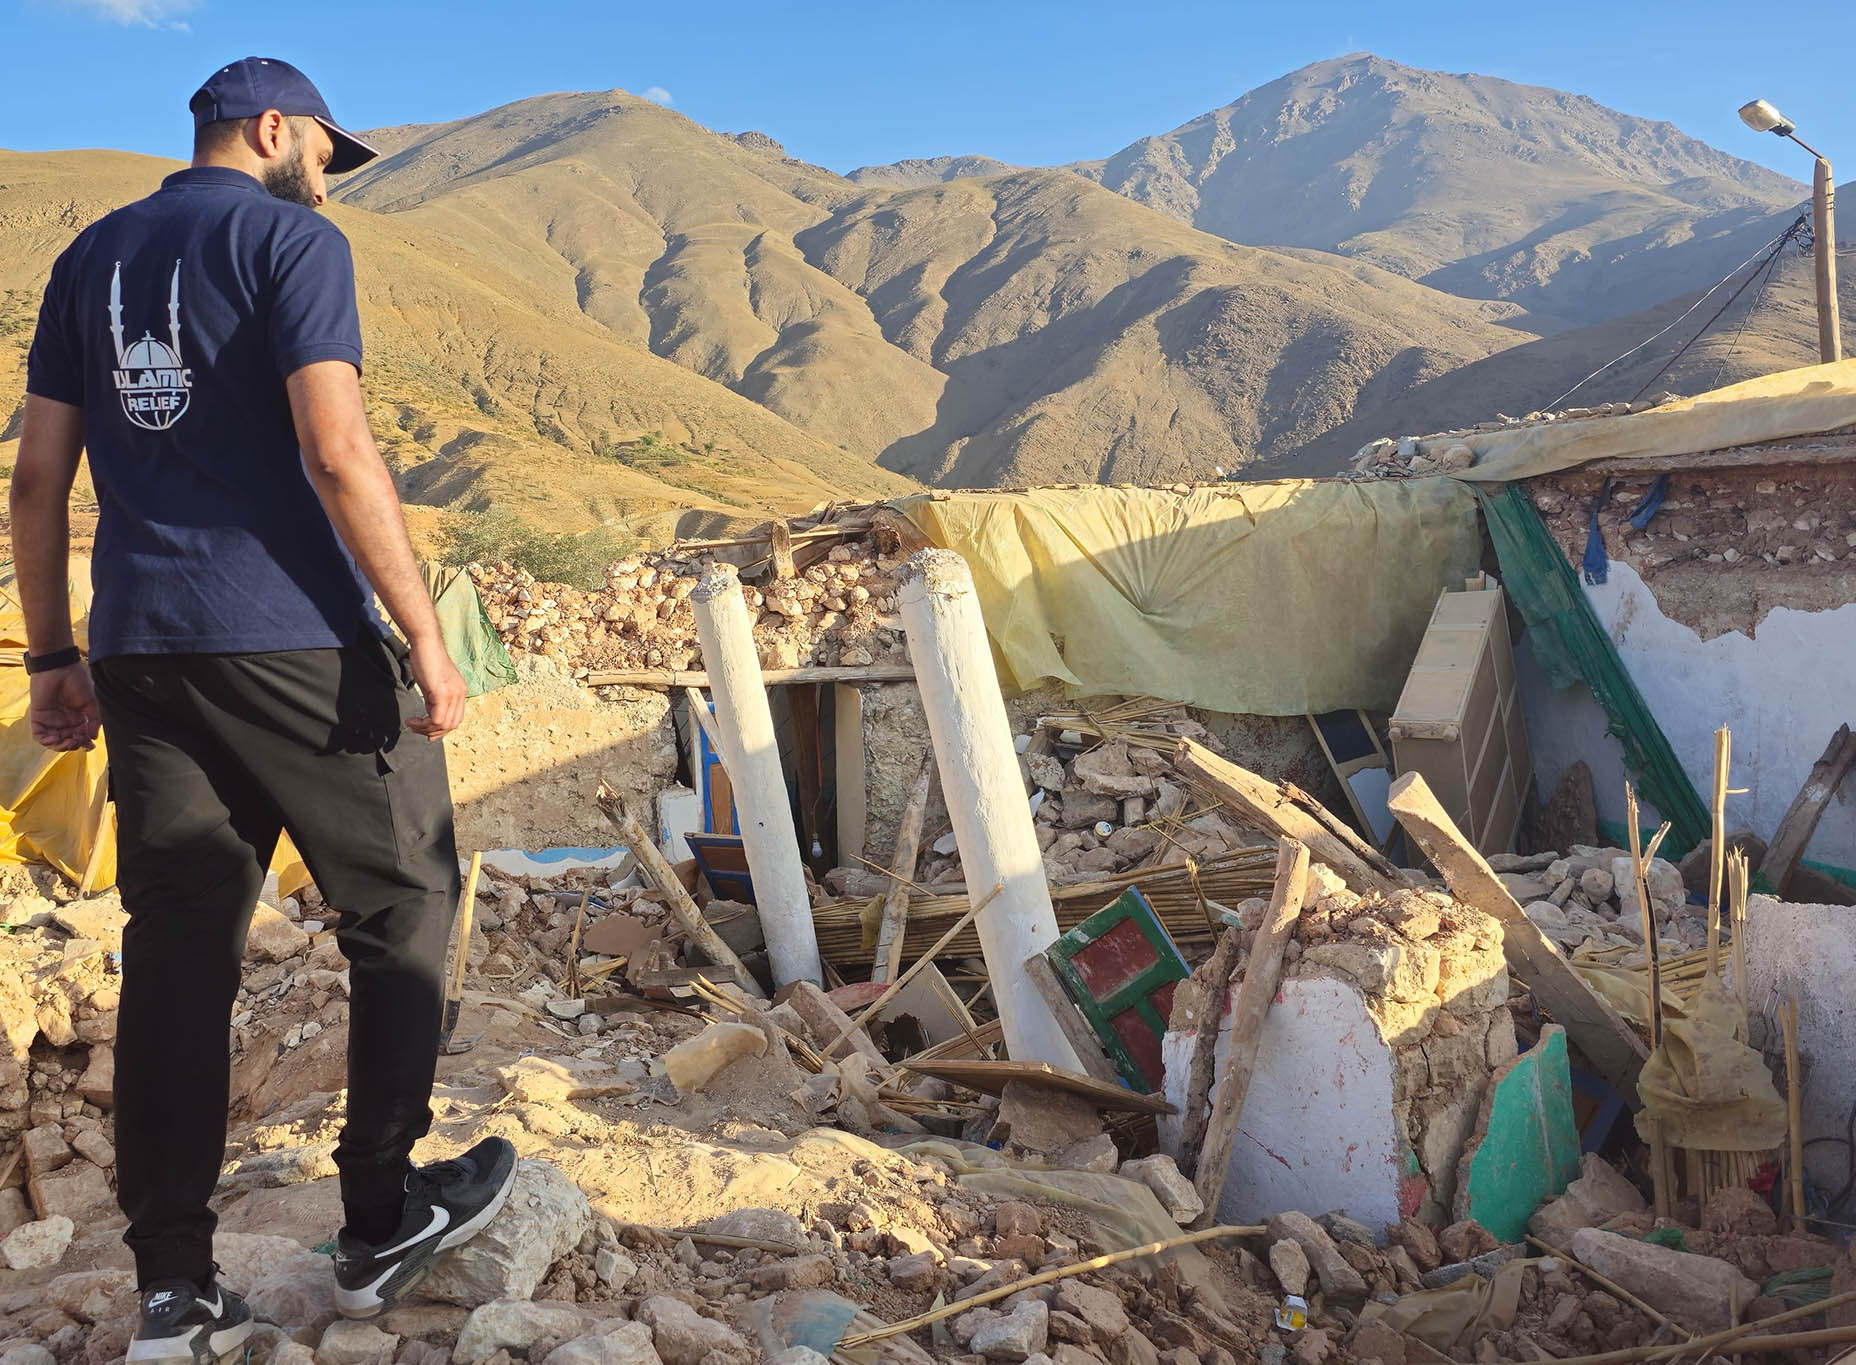 From the Ground in Morocco: Hana’s Firsthand Experience After the Earthquake